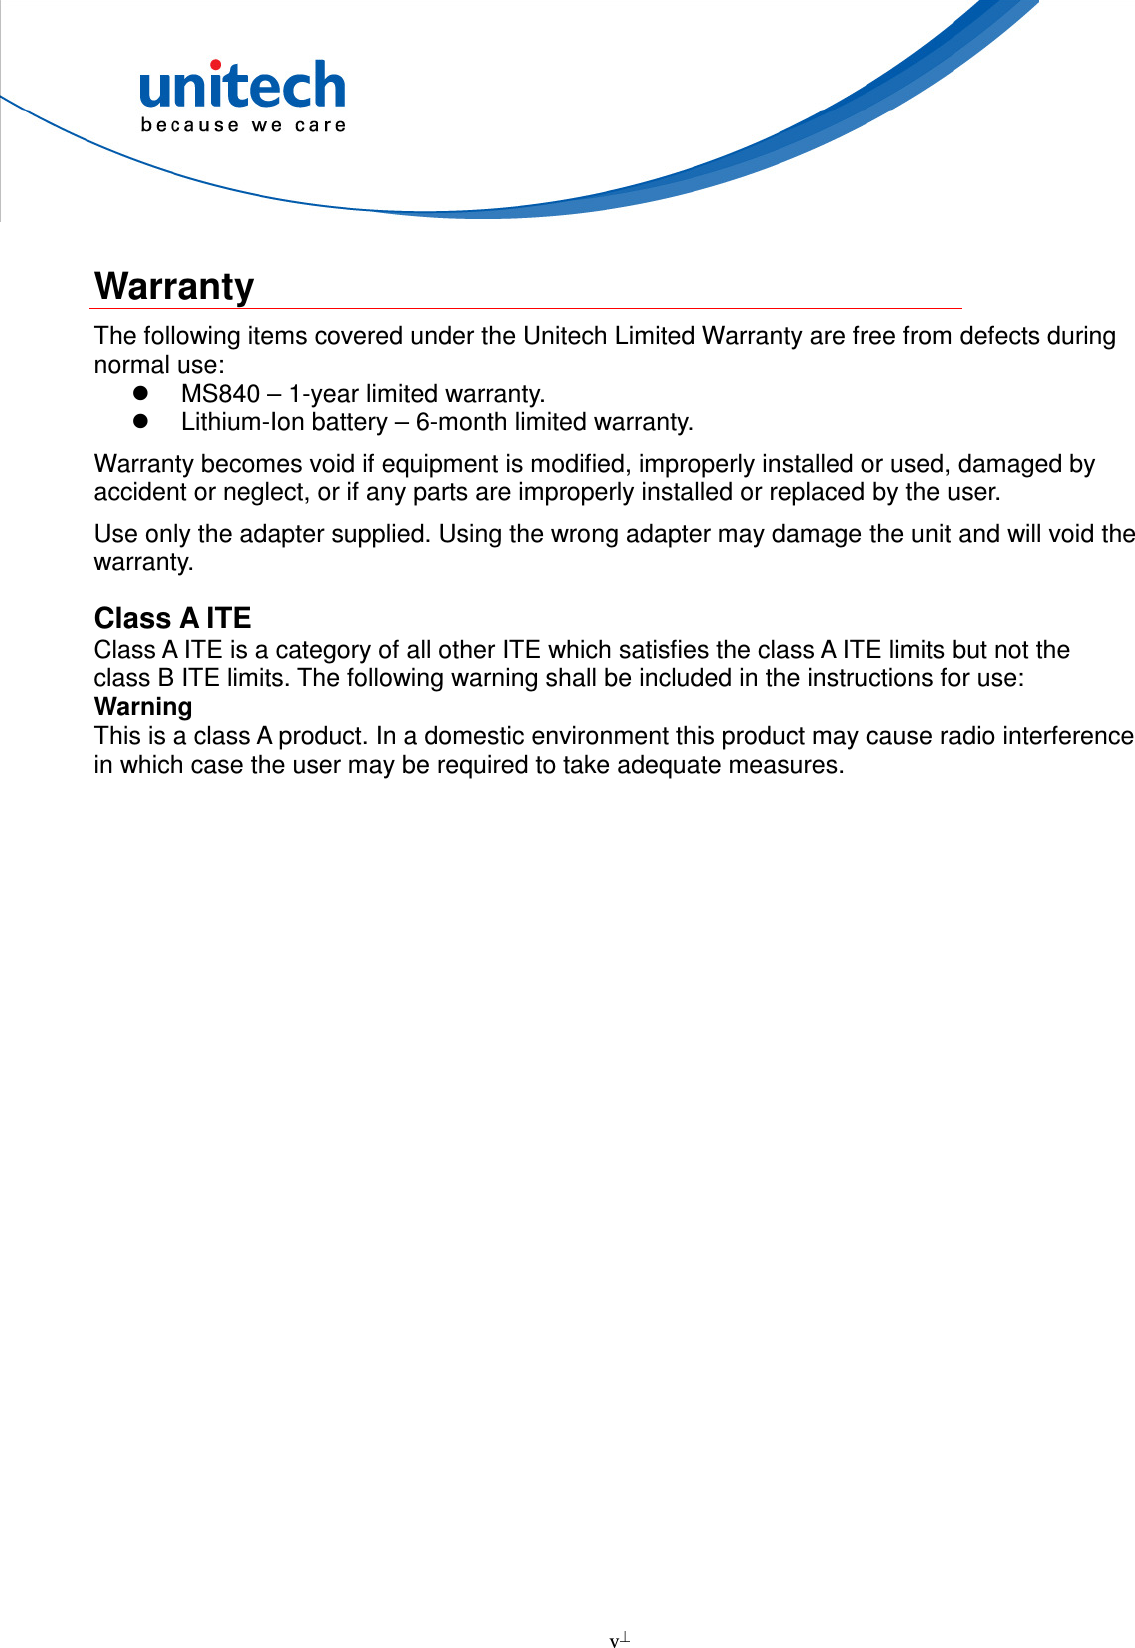  v   Warranty The following items covered under the Unitech Limited Warranty are free from defects during normal use:   MS840 – 1-year limited warranty.   Lithium-Ion battery – 6-month limited warranty. Warranty becomes void if equipment is modified, improperly installed or used, damaged by accident or neglect, or if any parts are improperly installed or replaced by the user. Use only the adapter supplied. Using the wrong adapter may damage the unit and will void the warranty. Class A ITE Class A ITE is a category of all other ITE which satisfies the class A ITE limits but not the class B ITE limits. The following warning shall be included in the instructions for use: Warning This is a class A product. In a domestic environment this product may cause radio interference in which case the user may be required to take adequate measures.